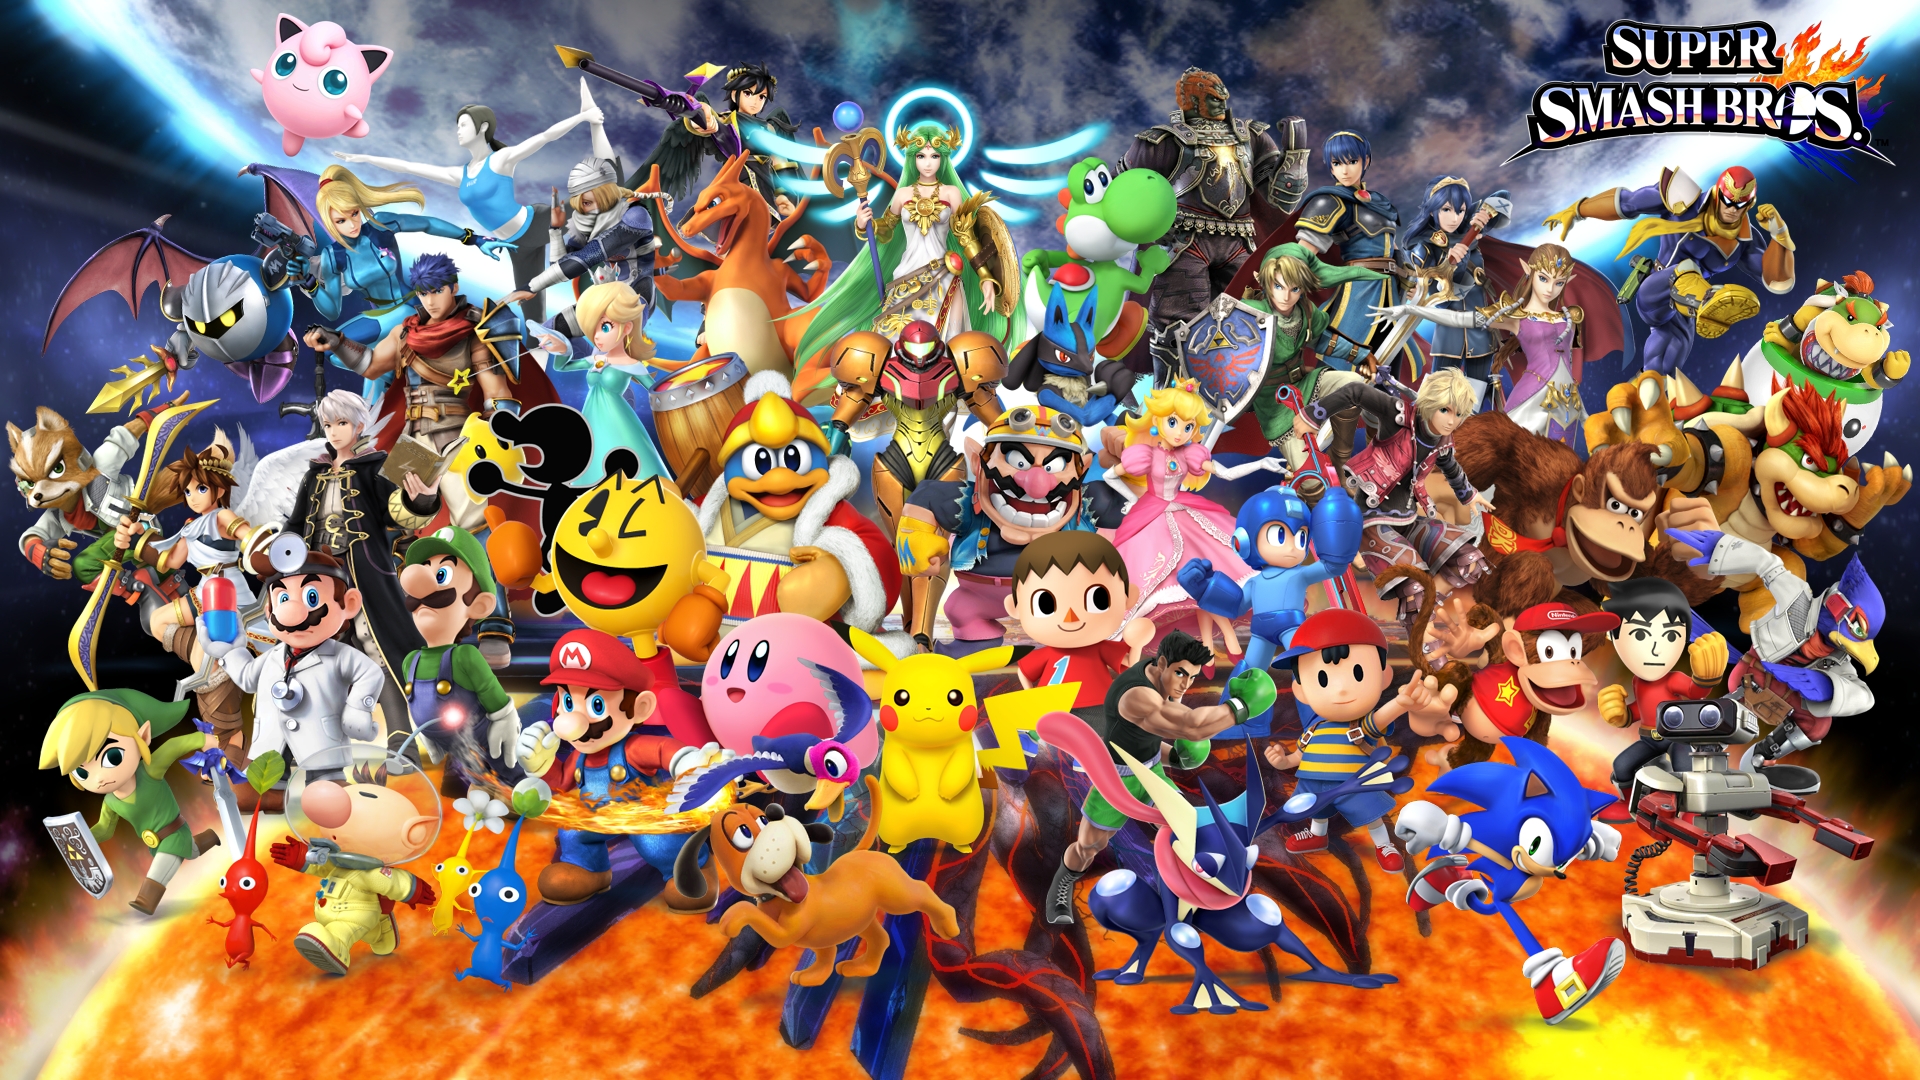 10 Latest Smash Bros Wallpaper Hd FULL HD 1080p For PC Background